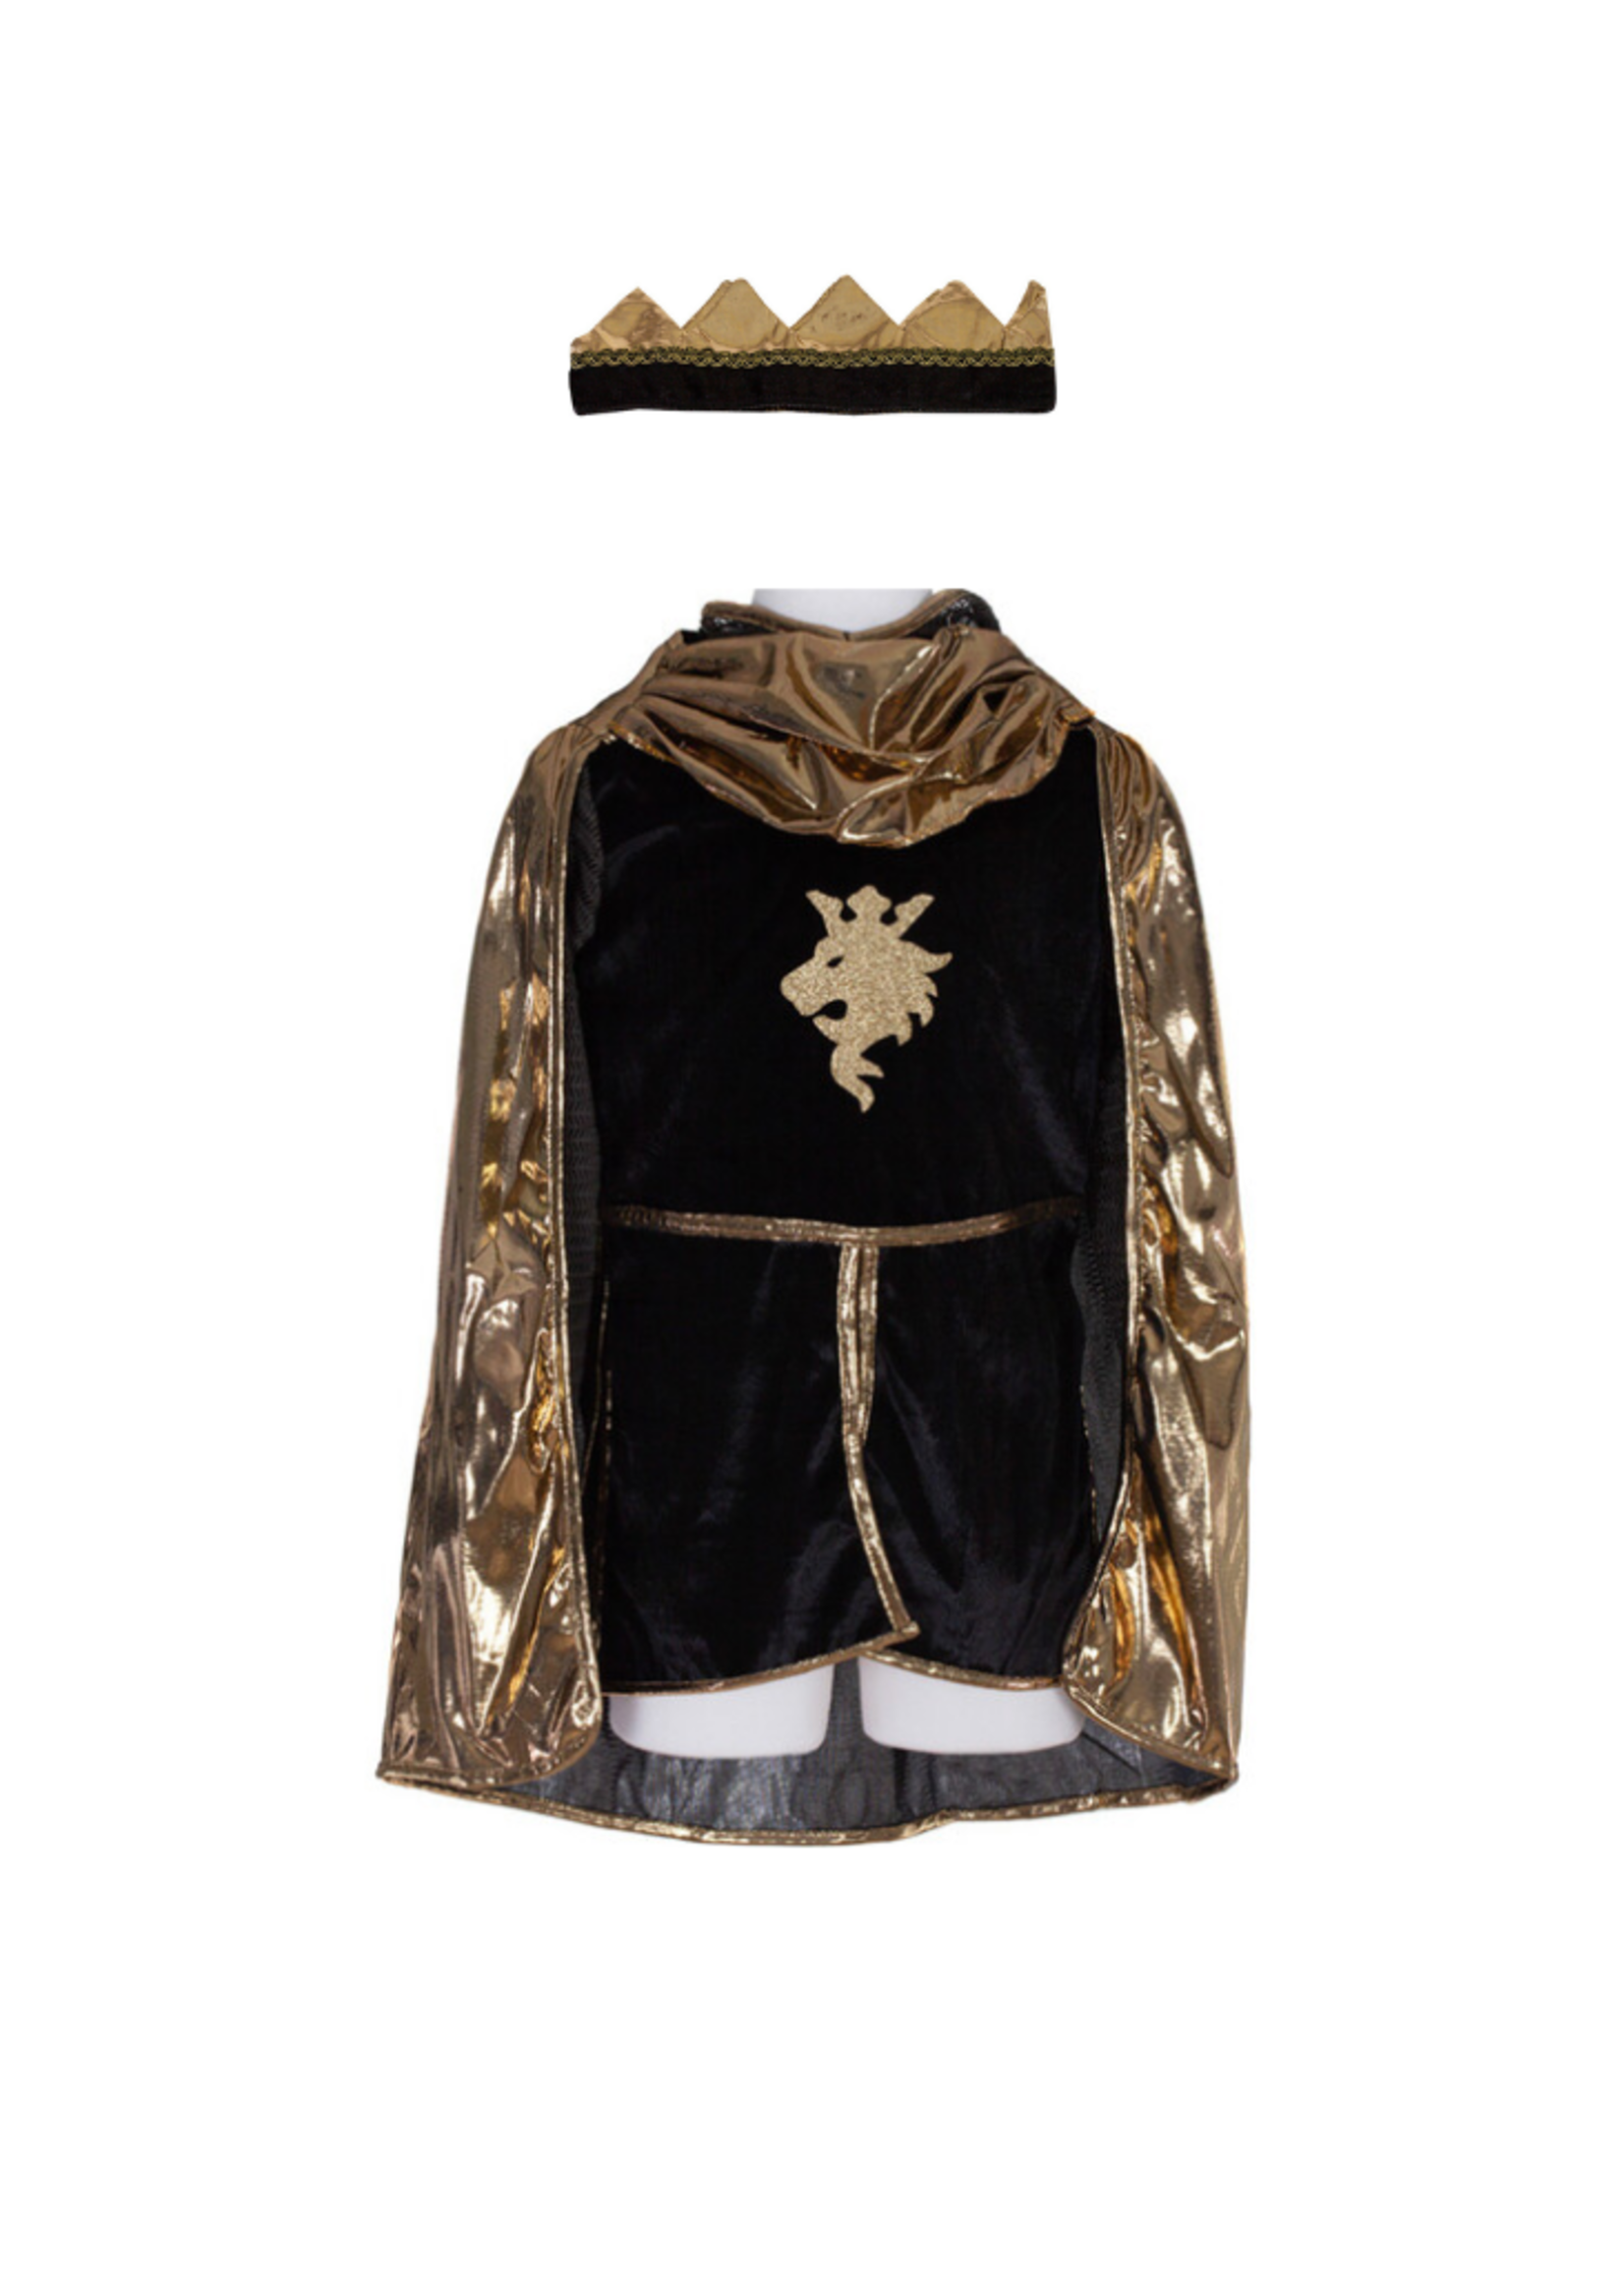 Great Pretenders Golden Knight With Tunic, Cape & Crown